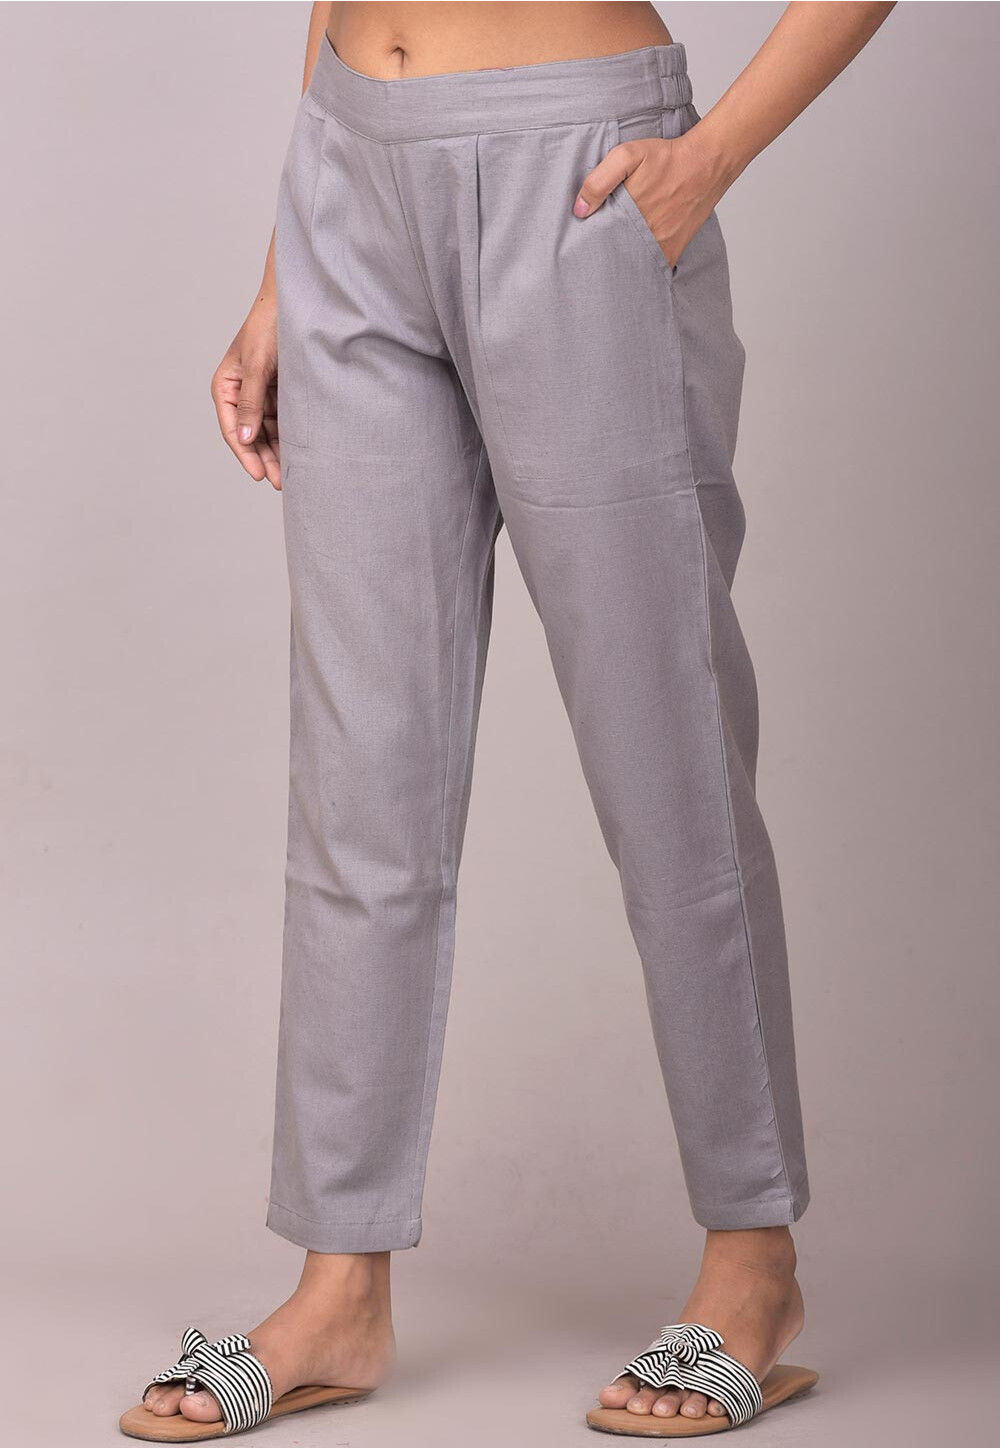 Berry Blush Women Cotton Pants casual and semi formal daily trousers